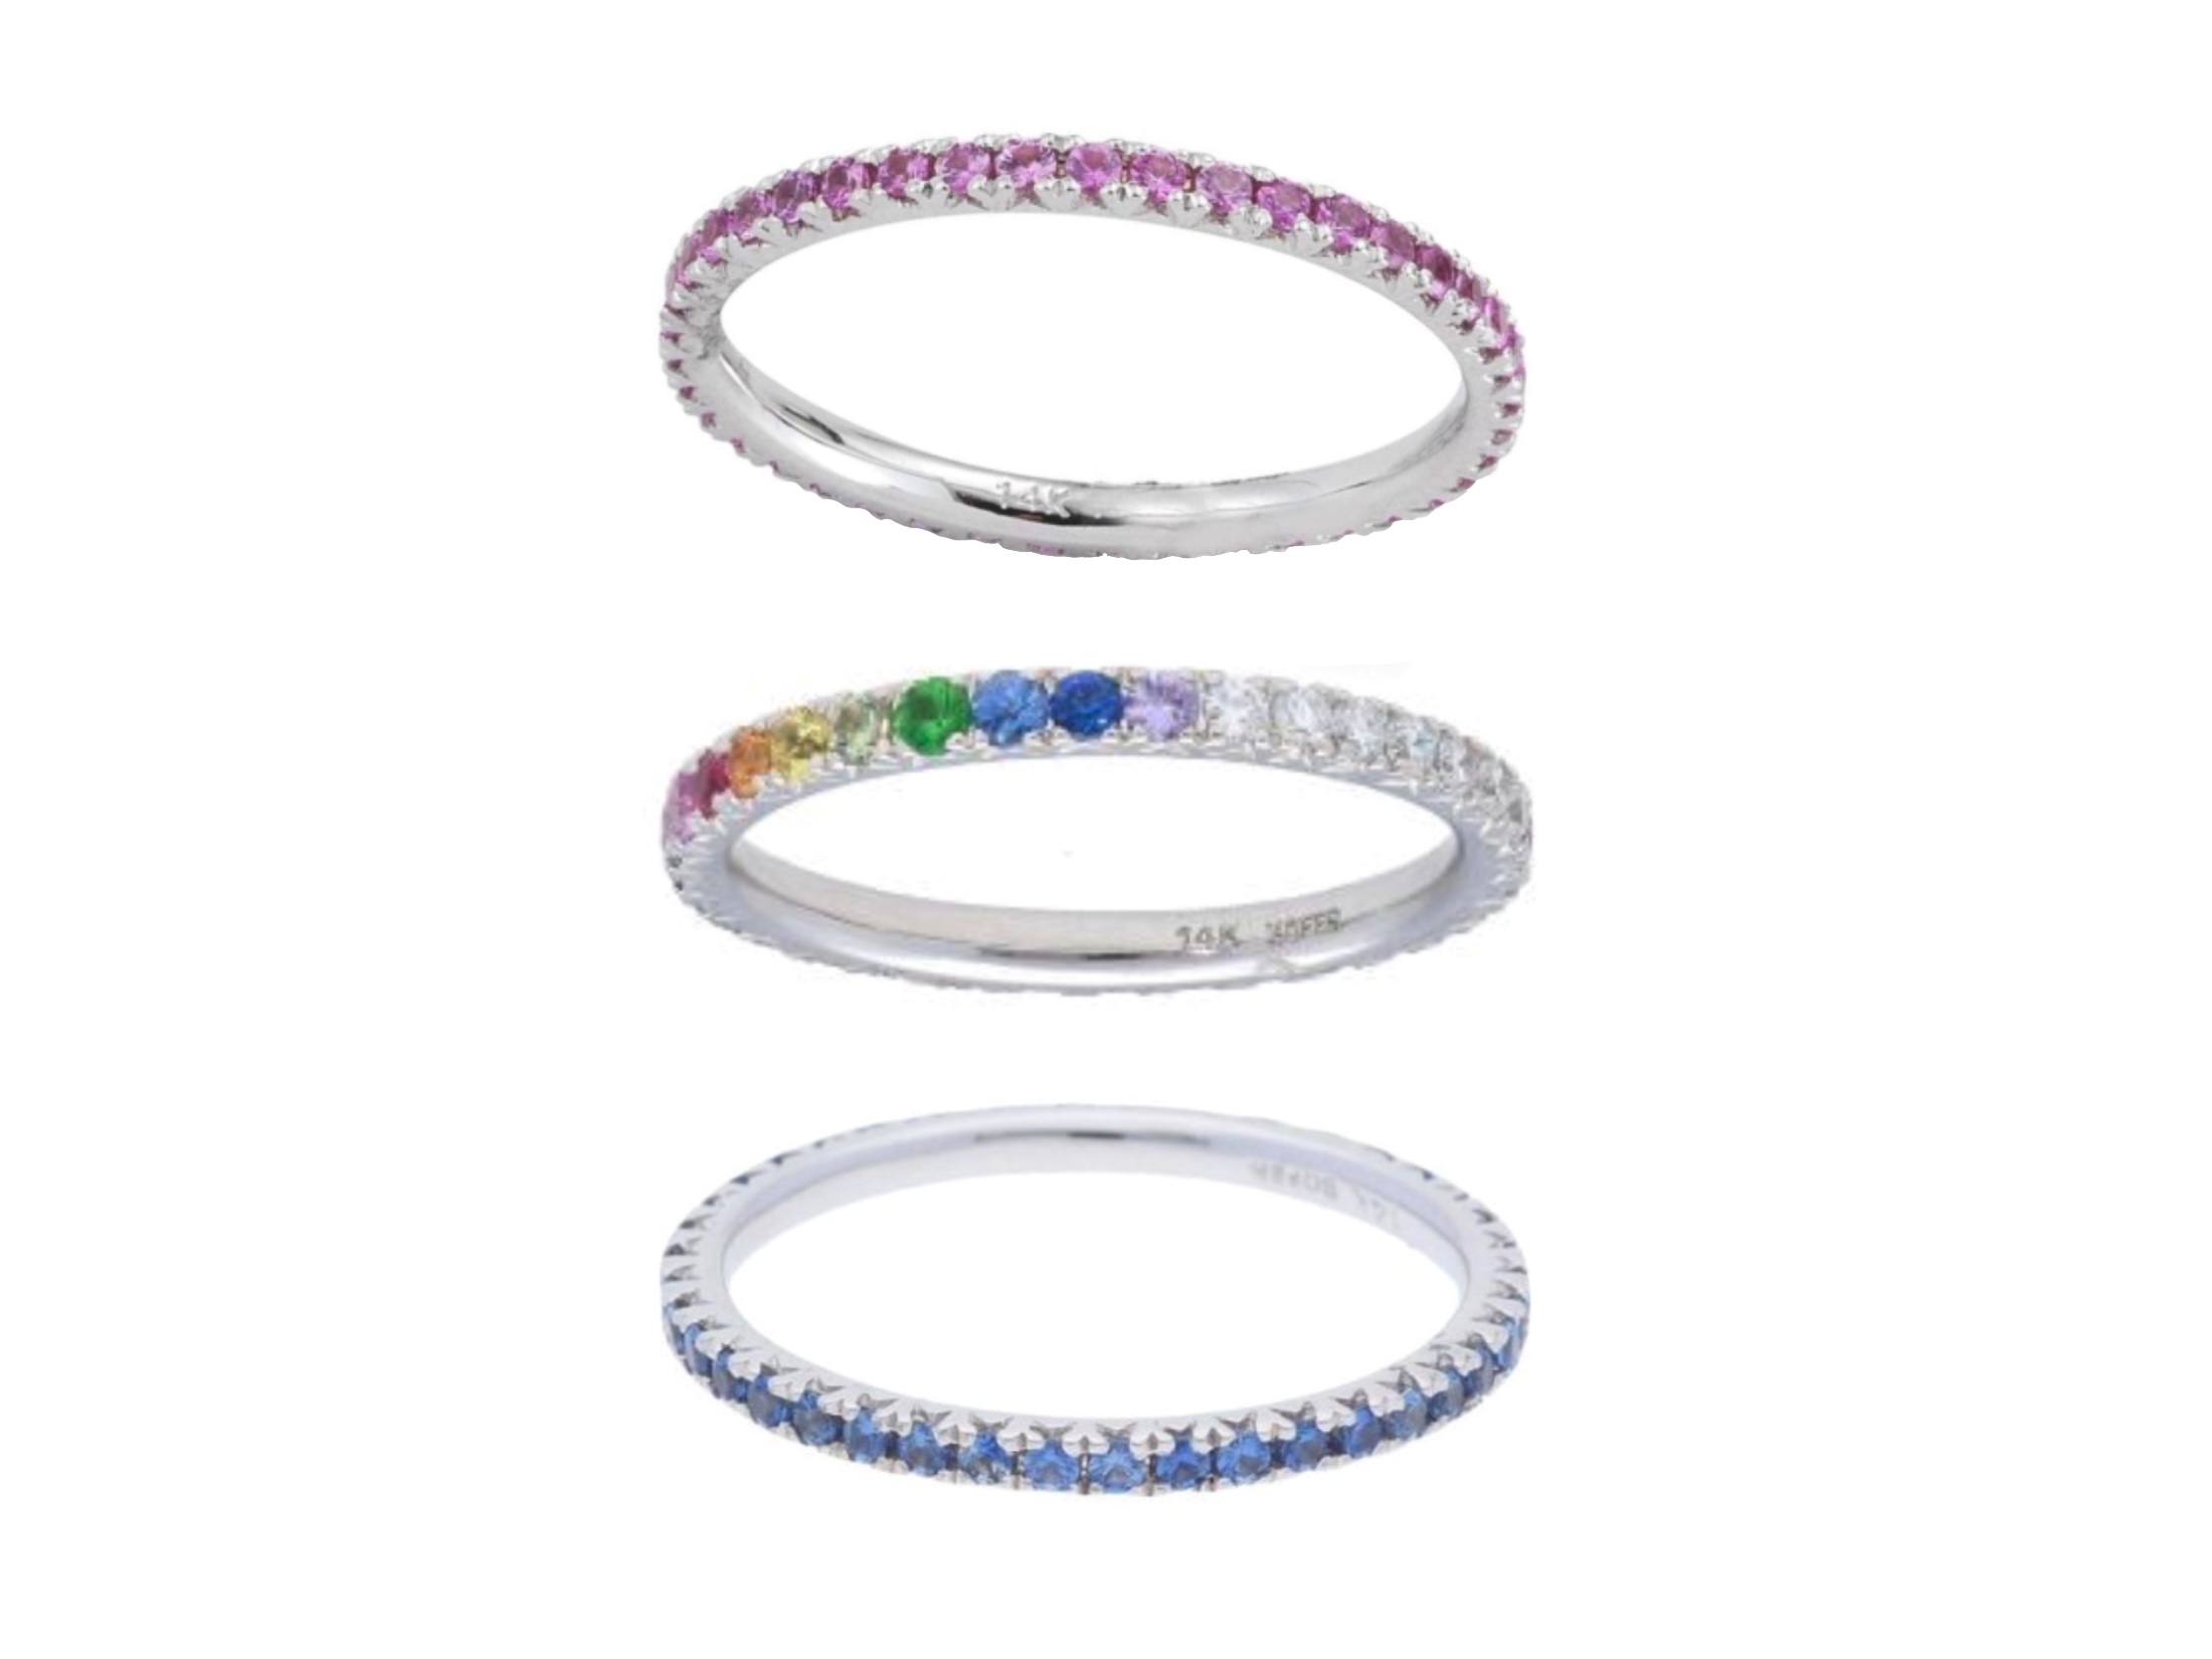 A ring stack in white gold with brightly colored gemstones. The bottom band is the Blue Sapphire Eternity Stackable Band by Deutsch Signature, the centerpiece ring is the Pavé Rainbow Eternity Stackable Band by Deutsch Signature, and the top ring is the Deutsch Signature Pink Sapphire Eternity Stackable Band, all available at Deutsch Fine Jewelry in Houston, Texas.